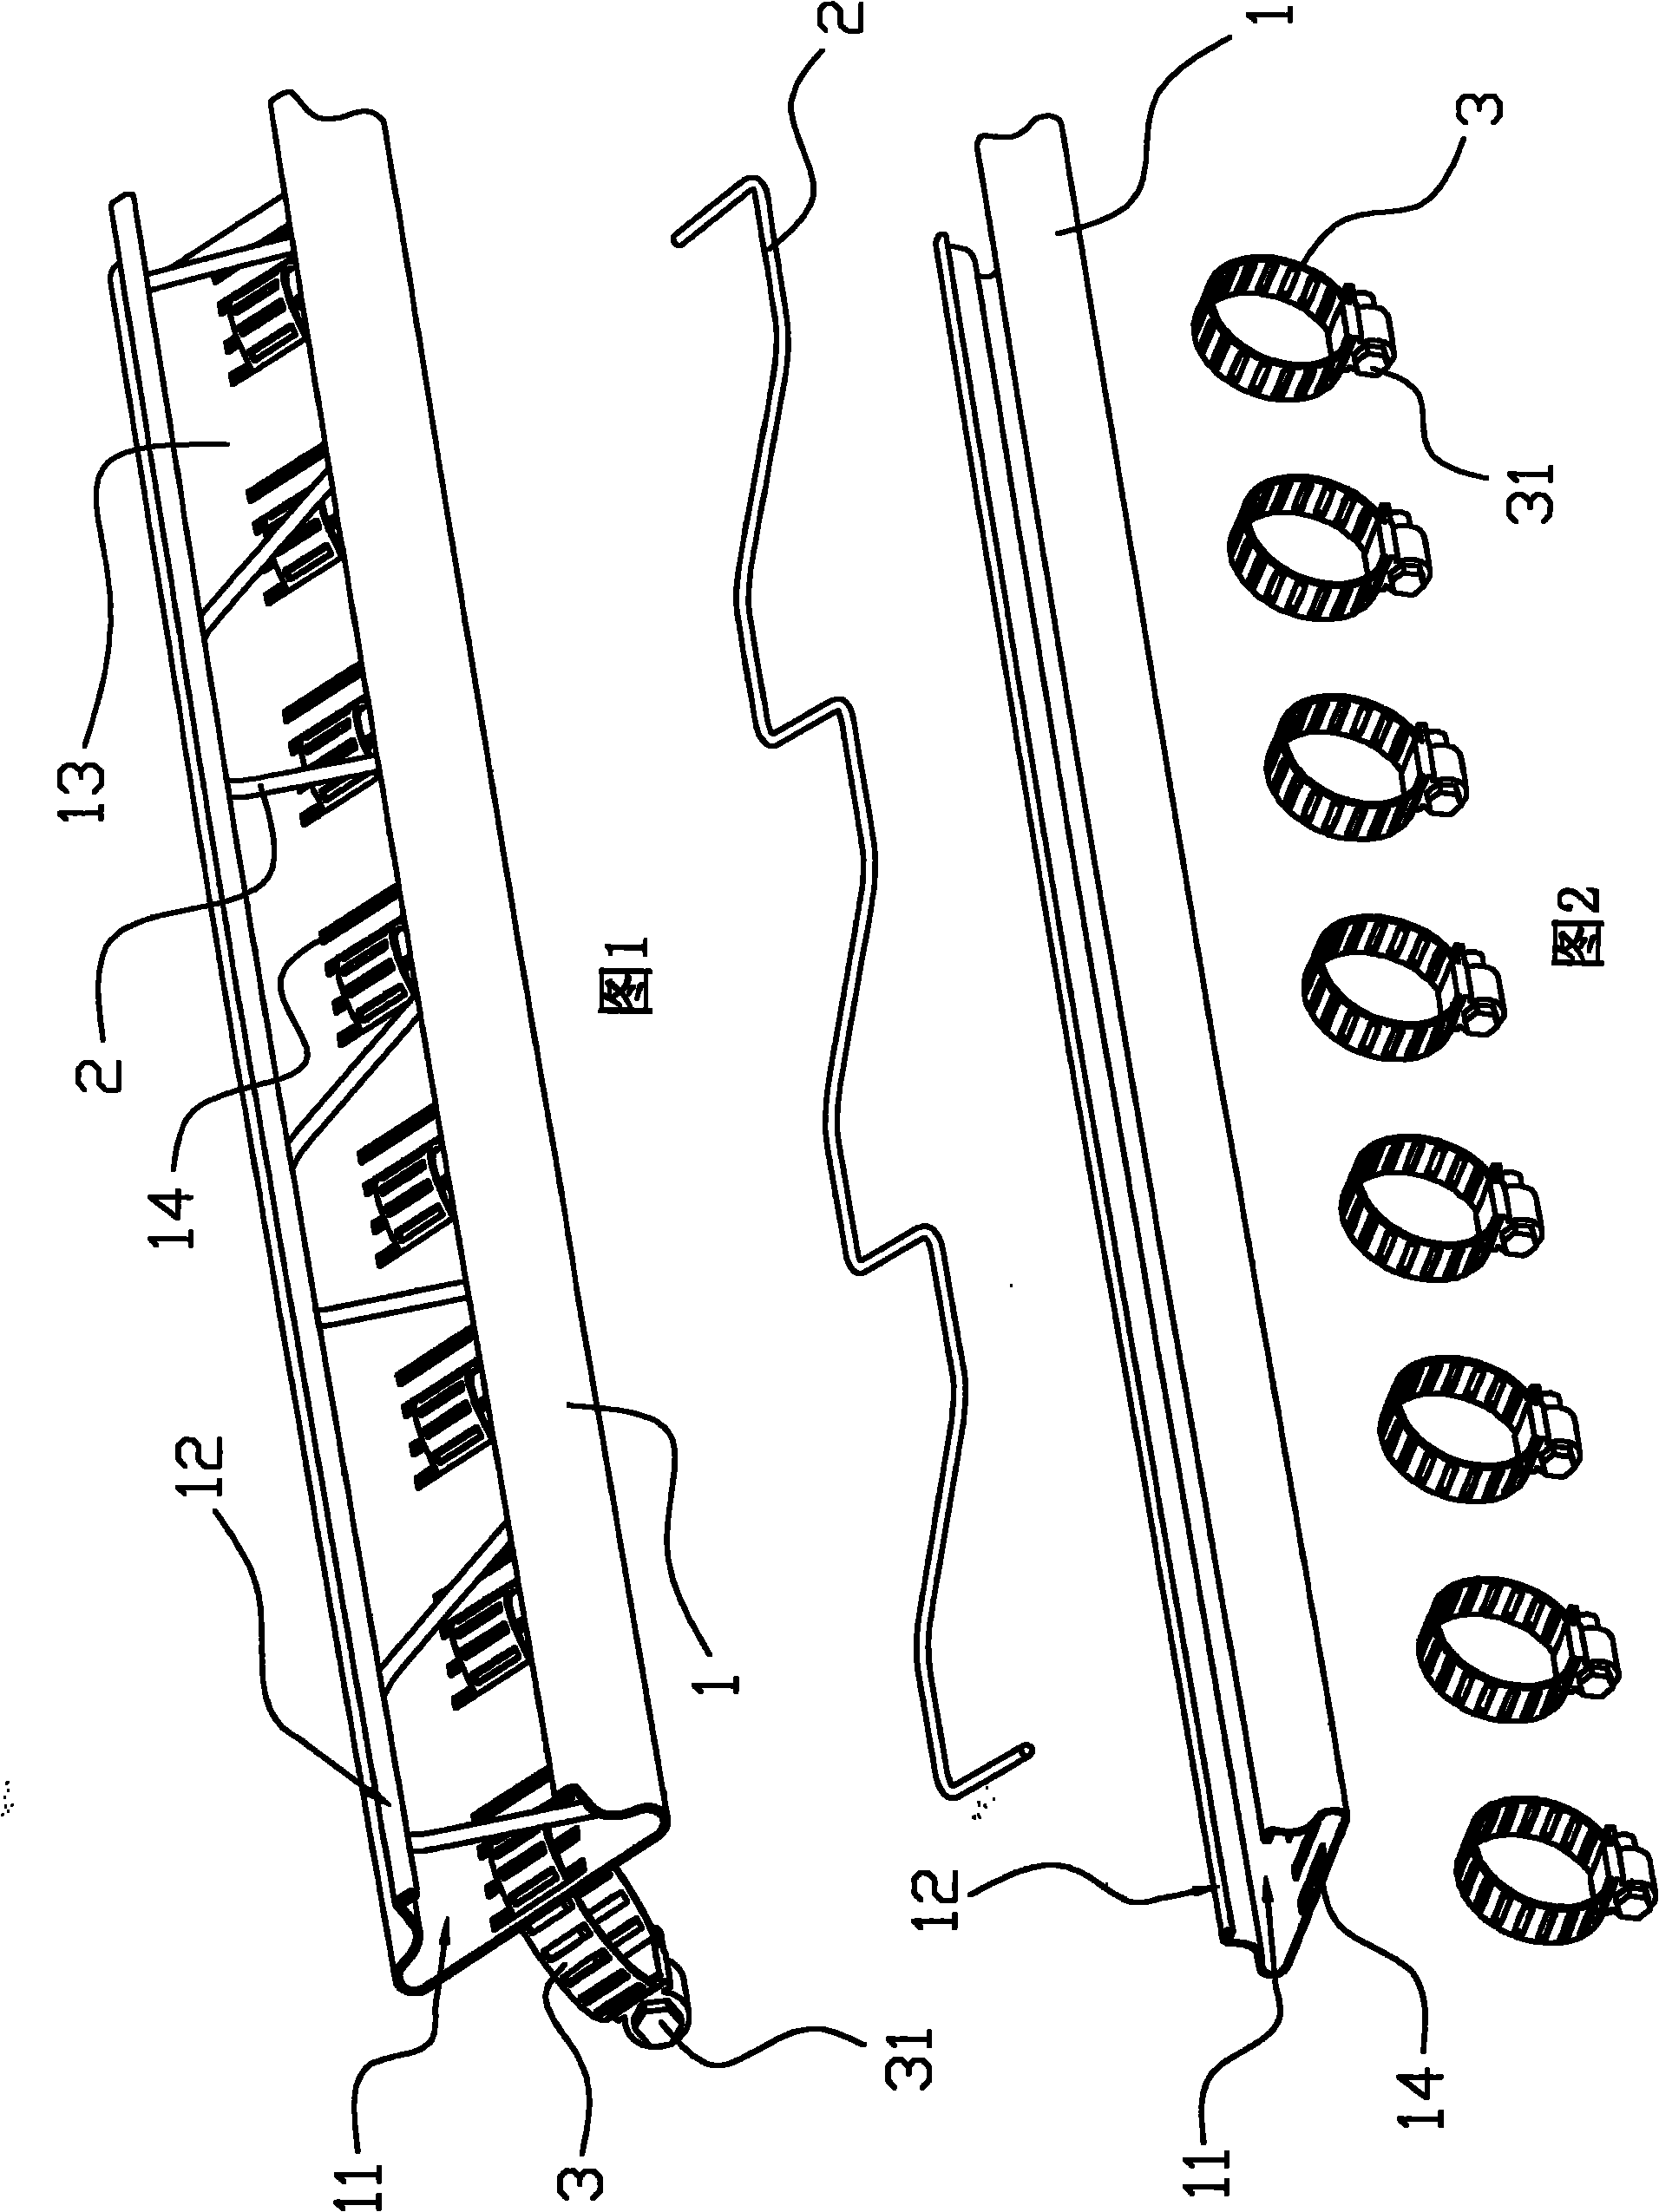 Clamping device for clamping films